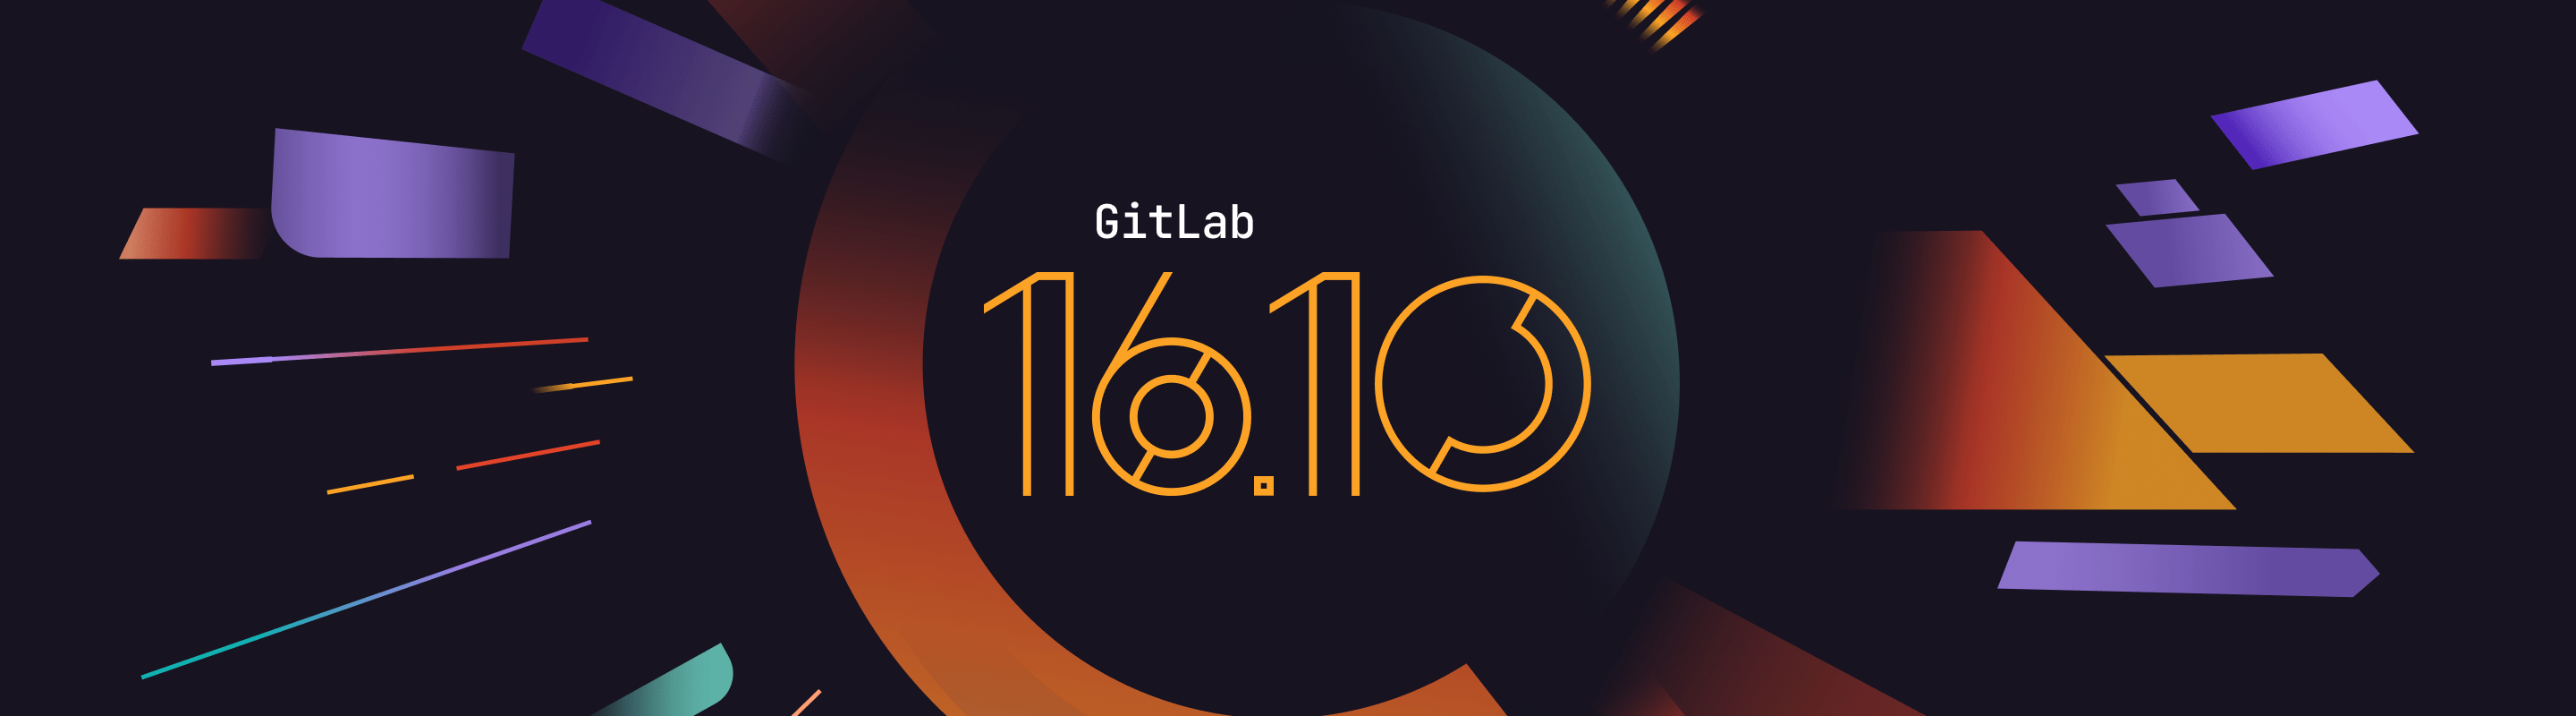 GitLab 16.10 released with semantic versioning in the CI/CD catalog (23 minute read)